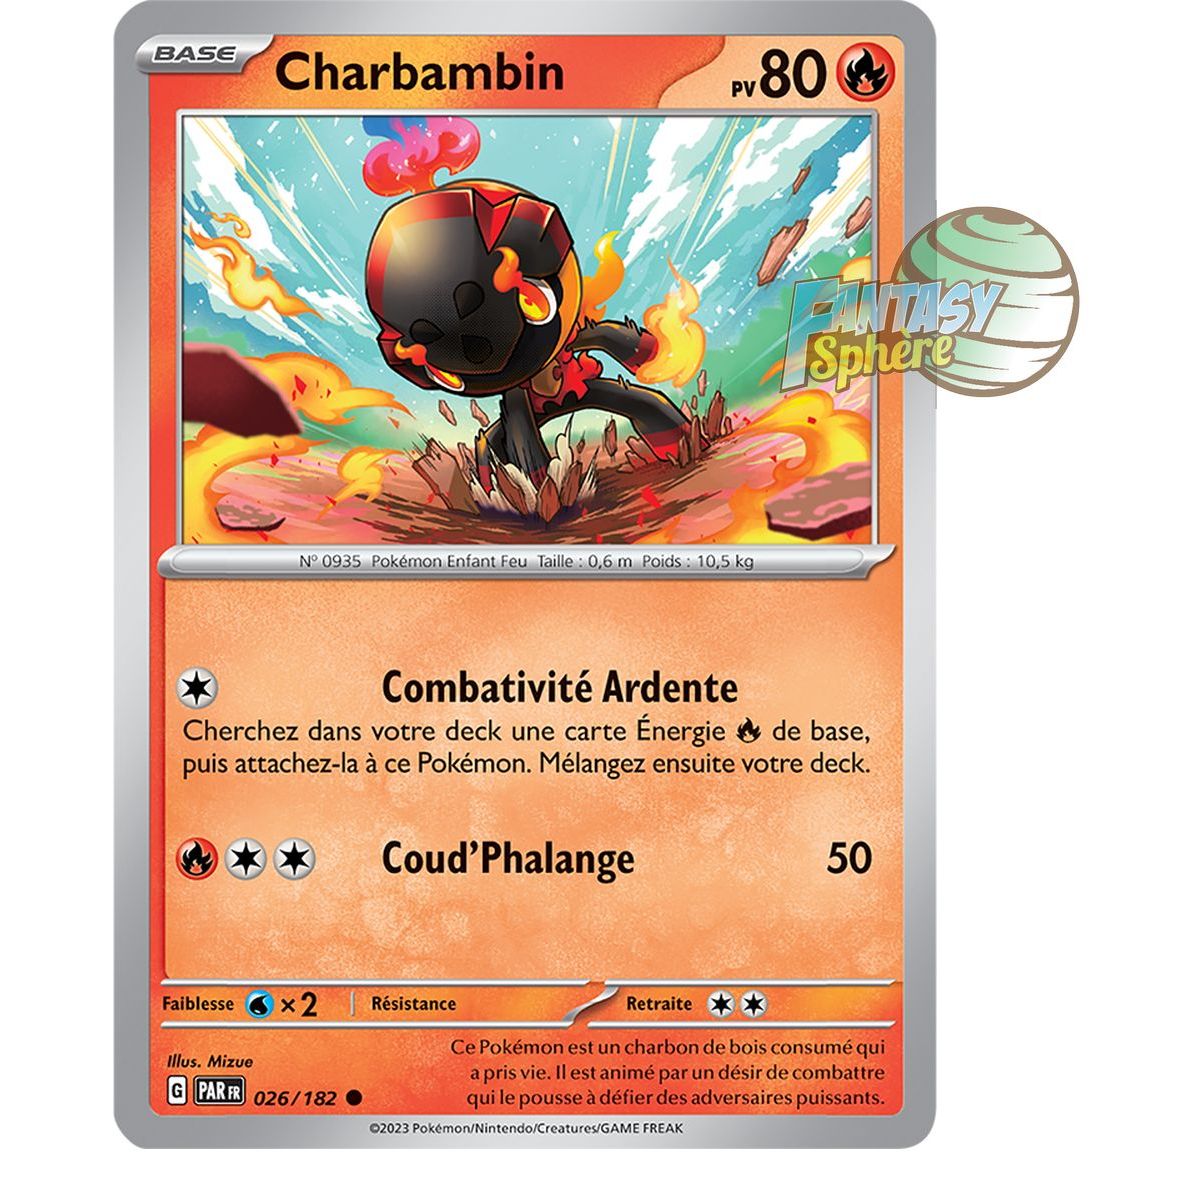 Charbambin - Commune 26/182 - Scarlet and Violet Faille Paradox